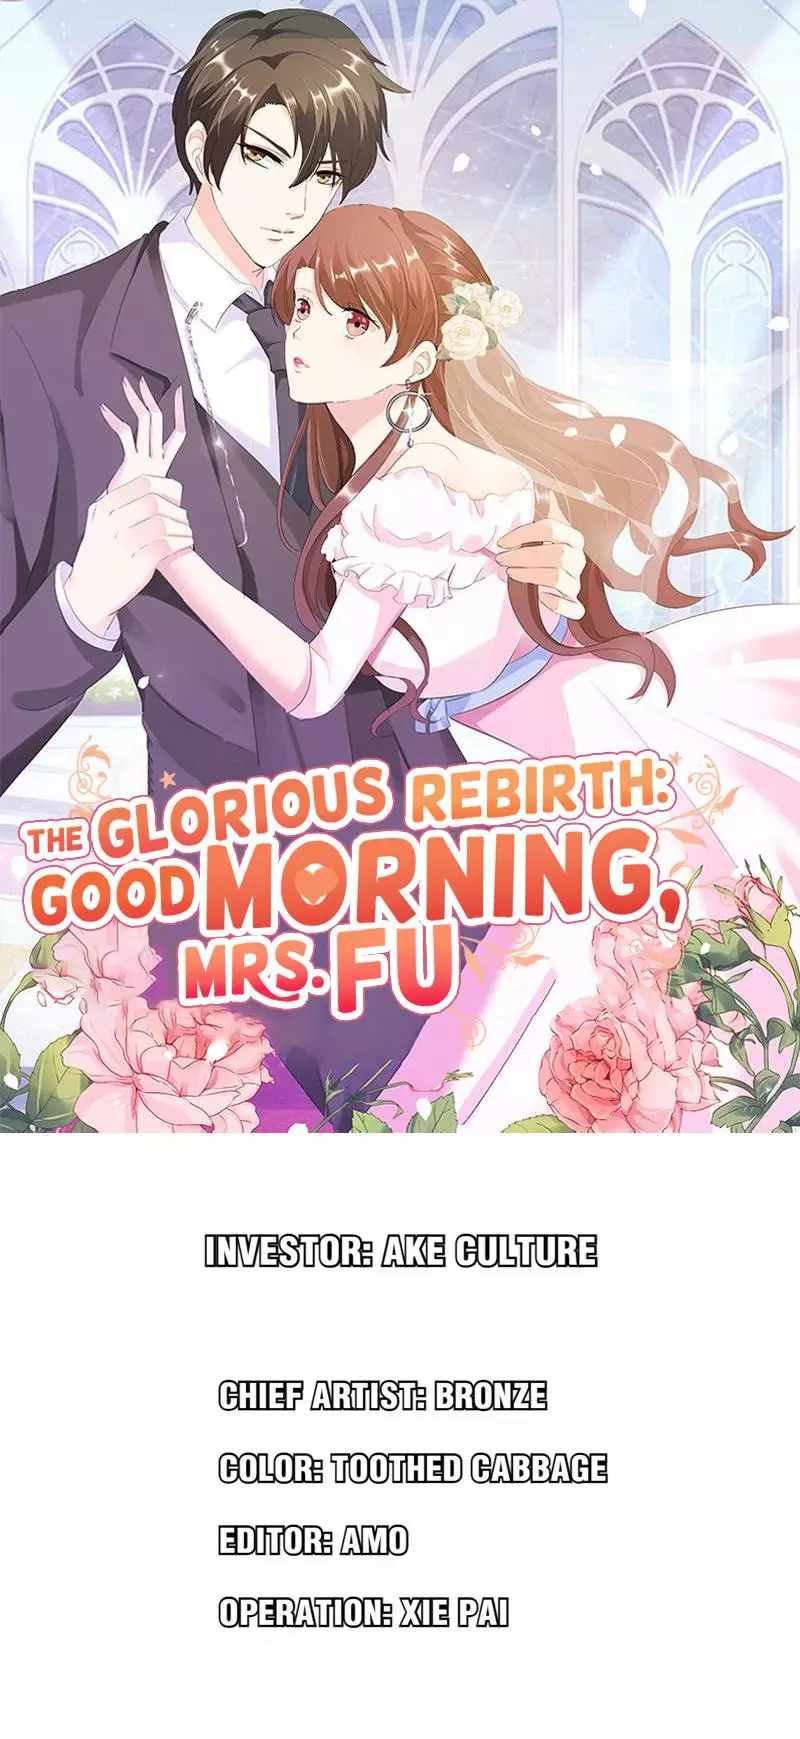 The Glorious Rebirth: Good Morning, Mrs. Fu - 89 page 1-95568f9d